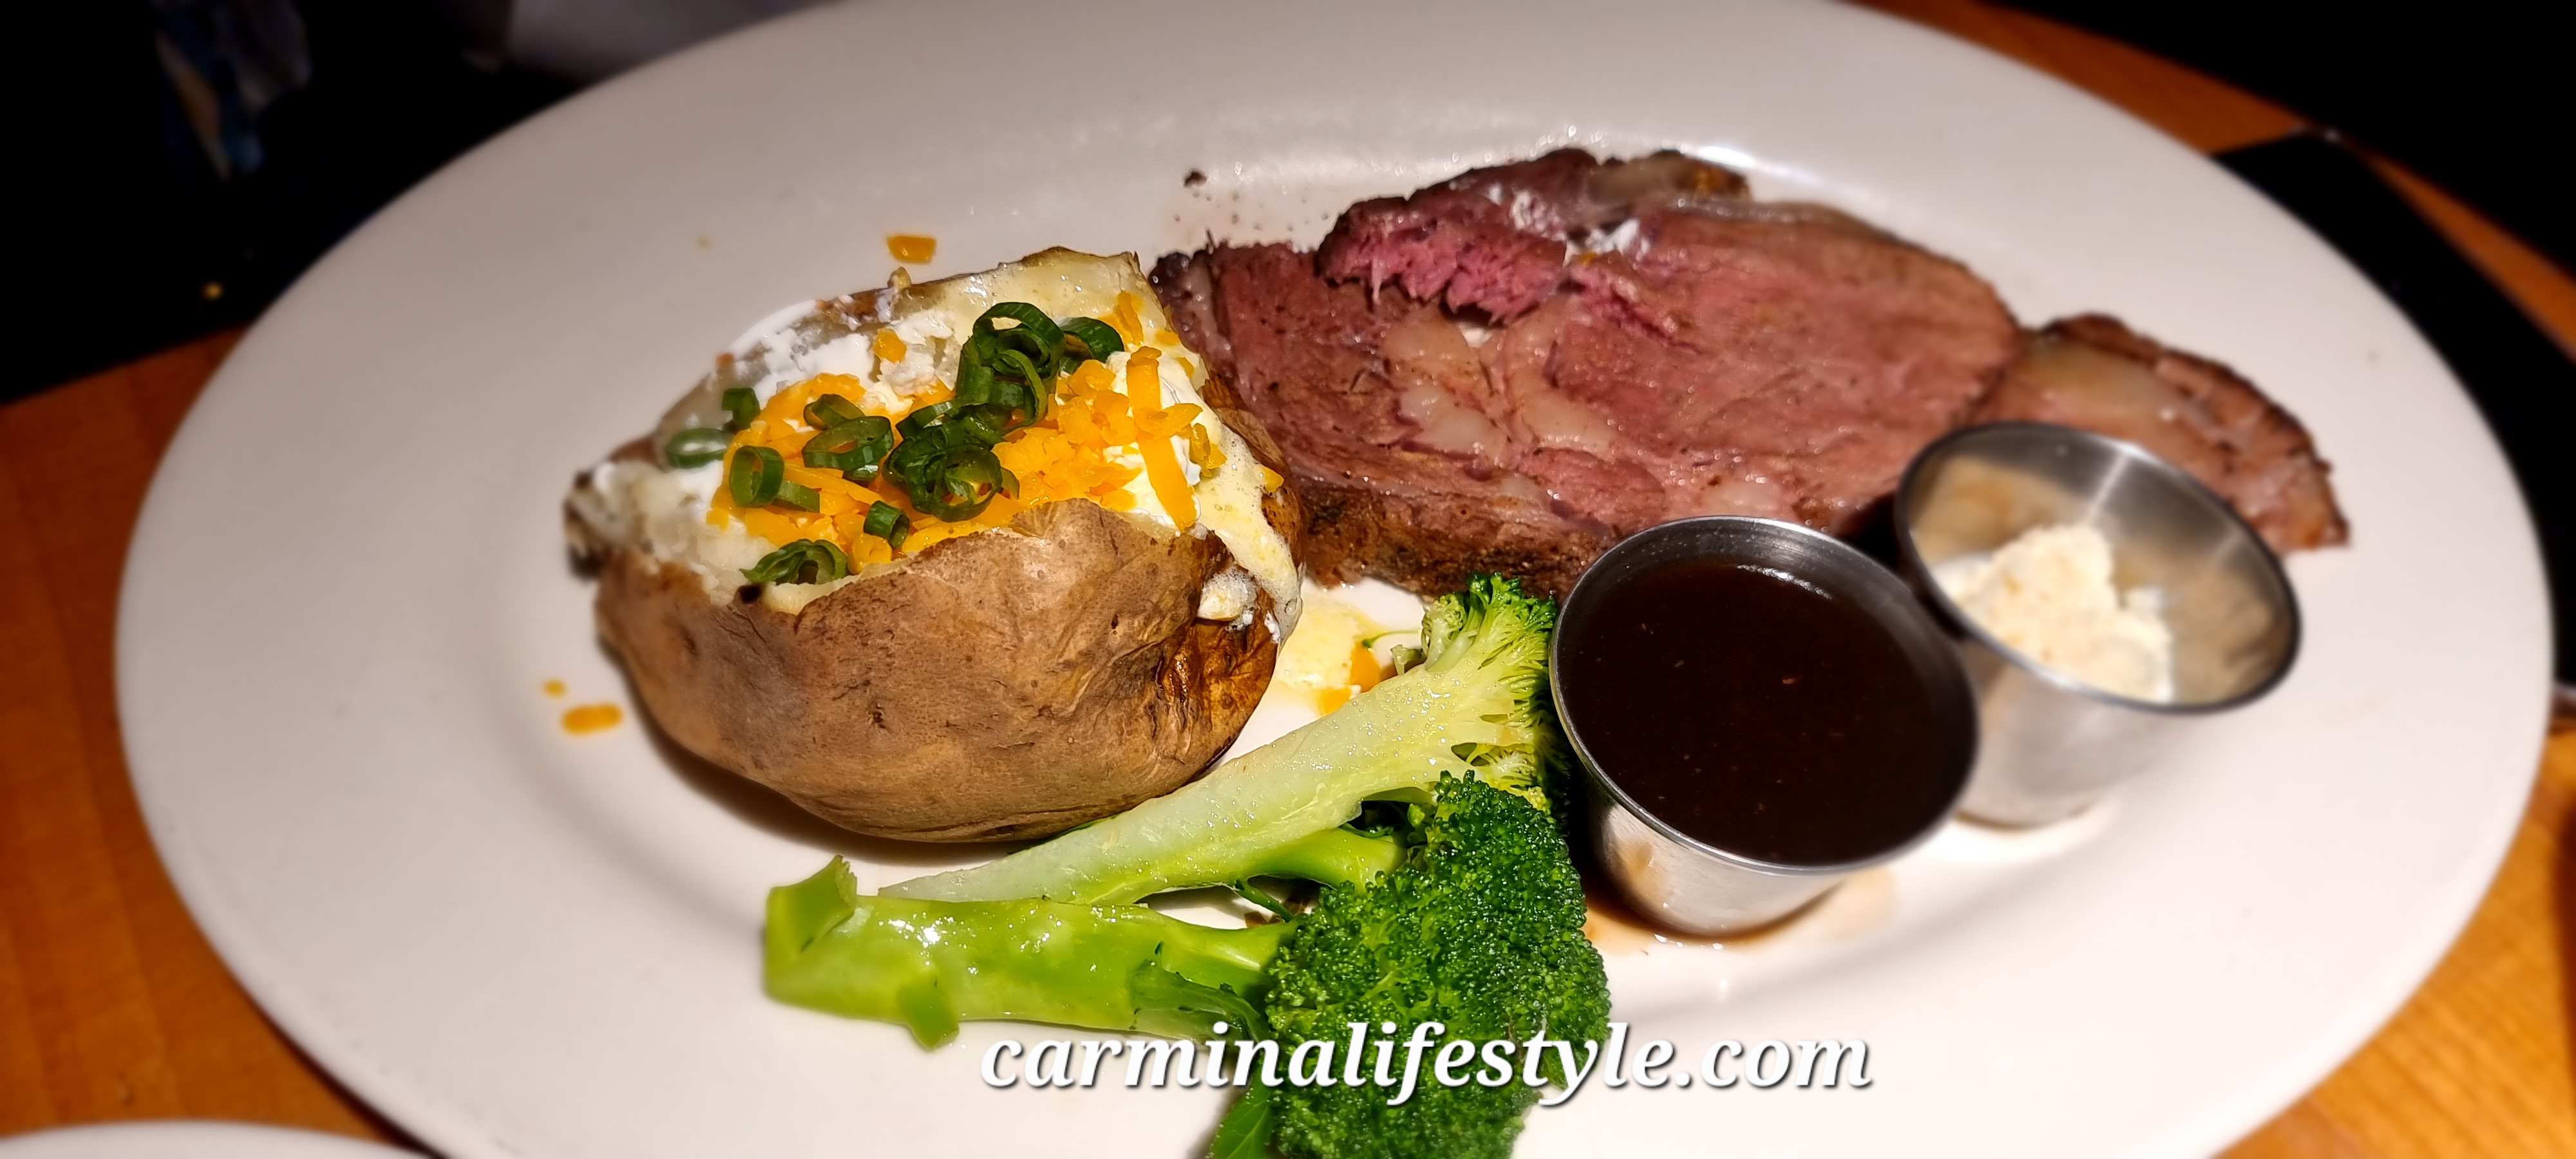 Campfire Feast Dinner for Two at Black Angus Steakhouse